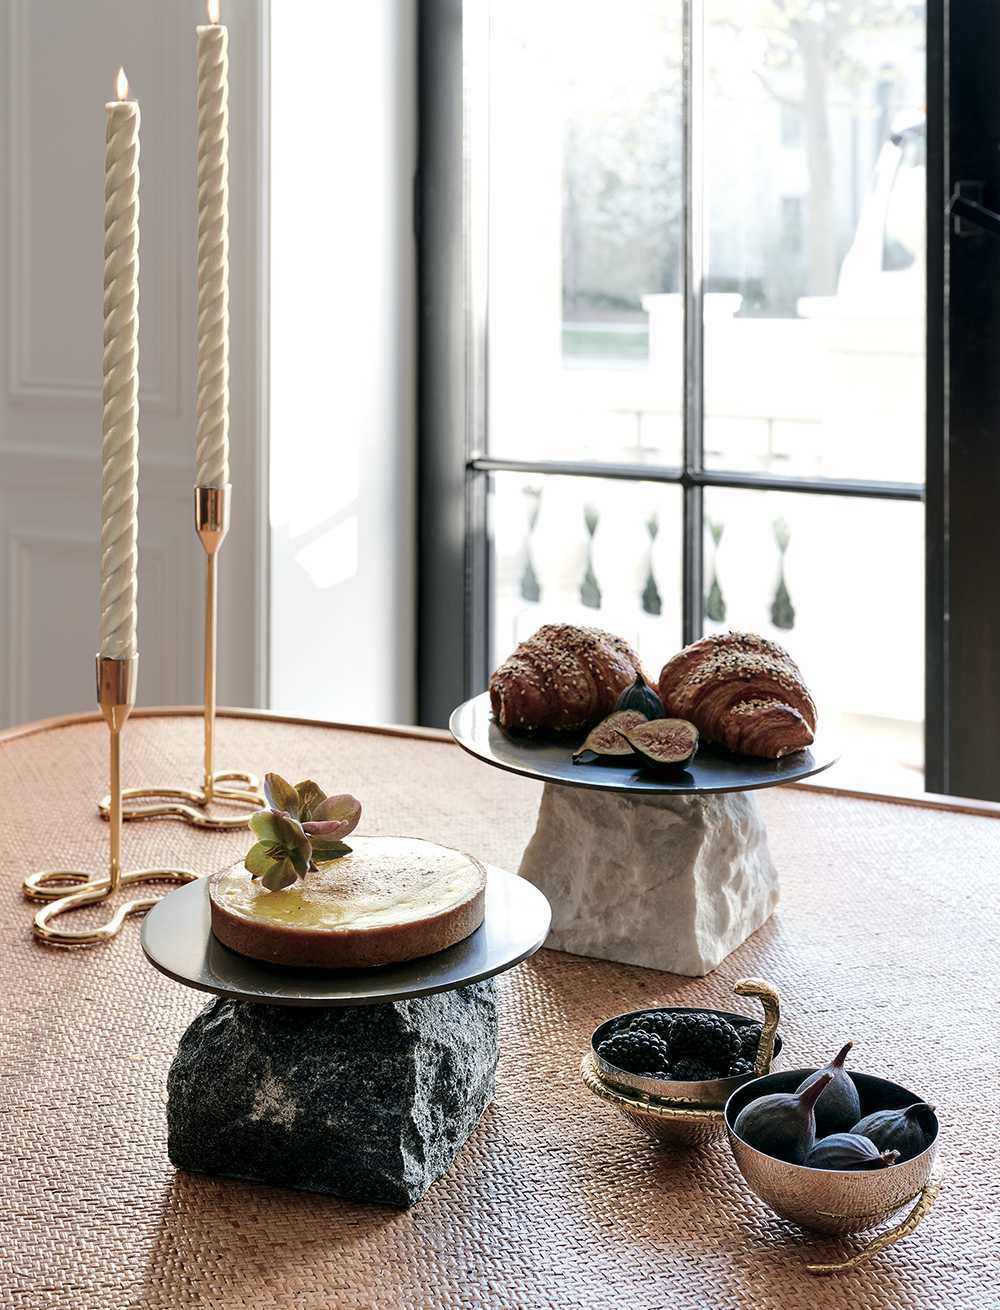 Luxurious tabletop items including candle holders and serving vessels